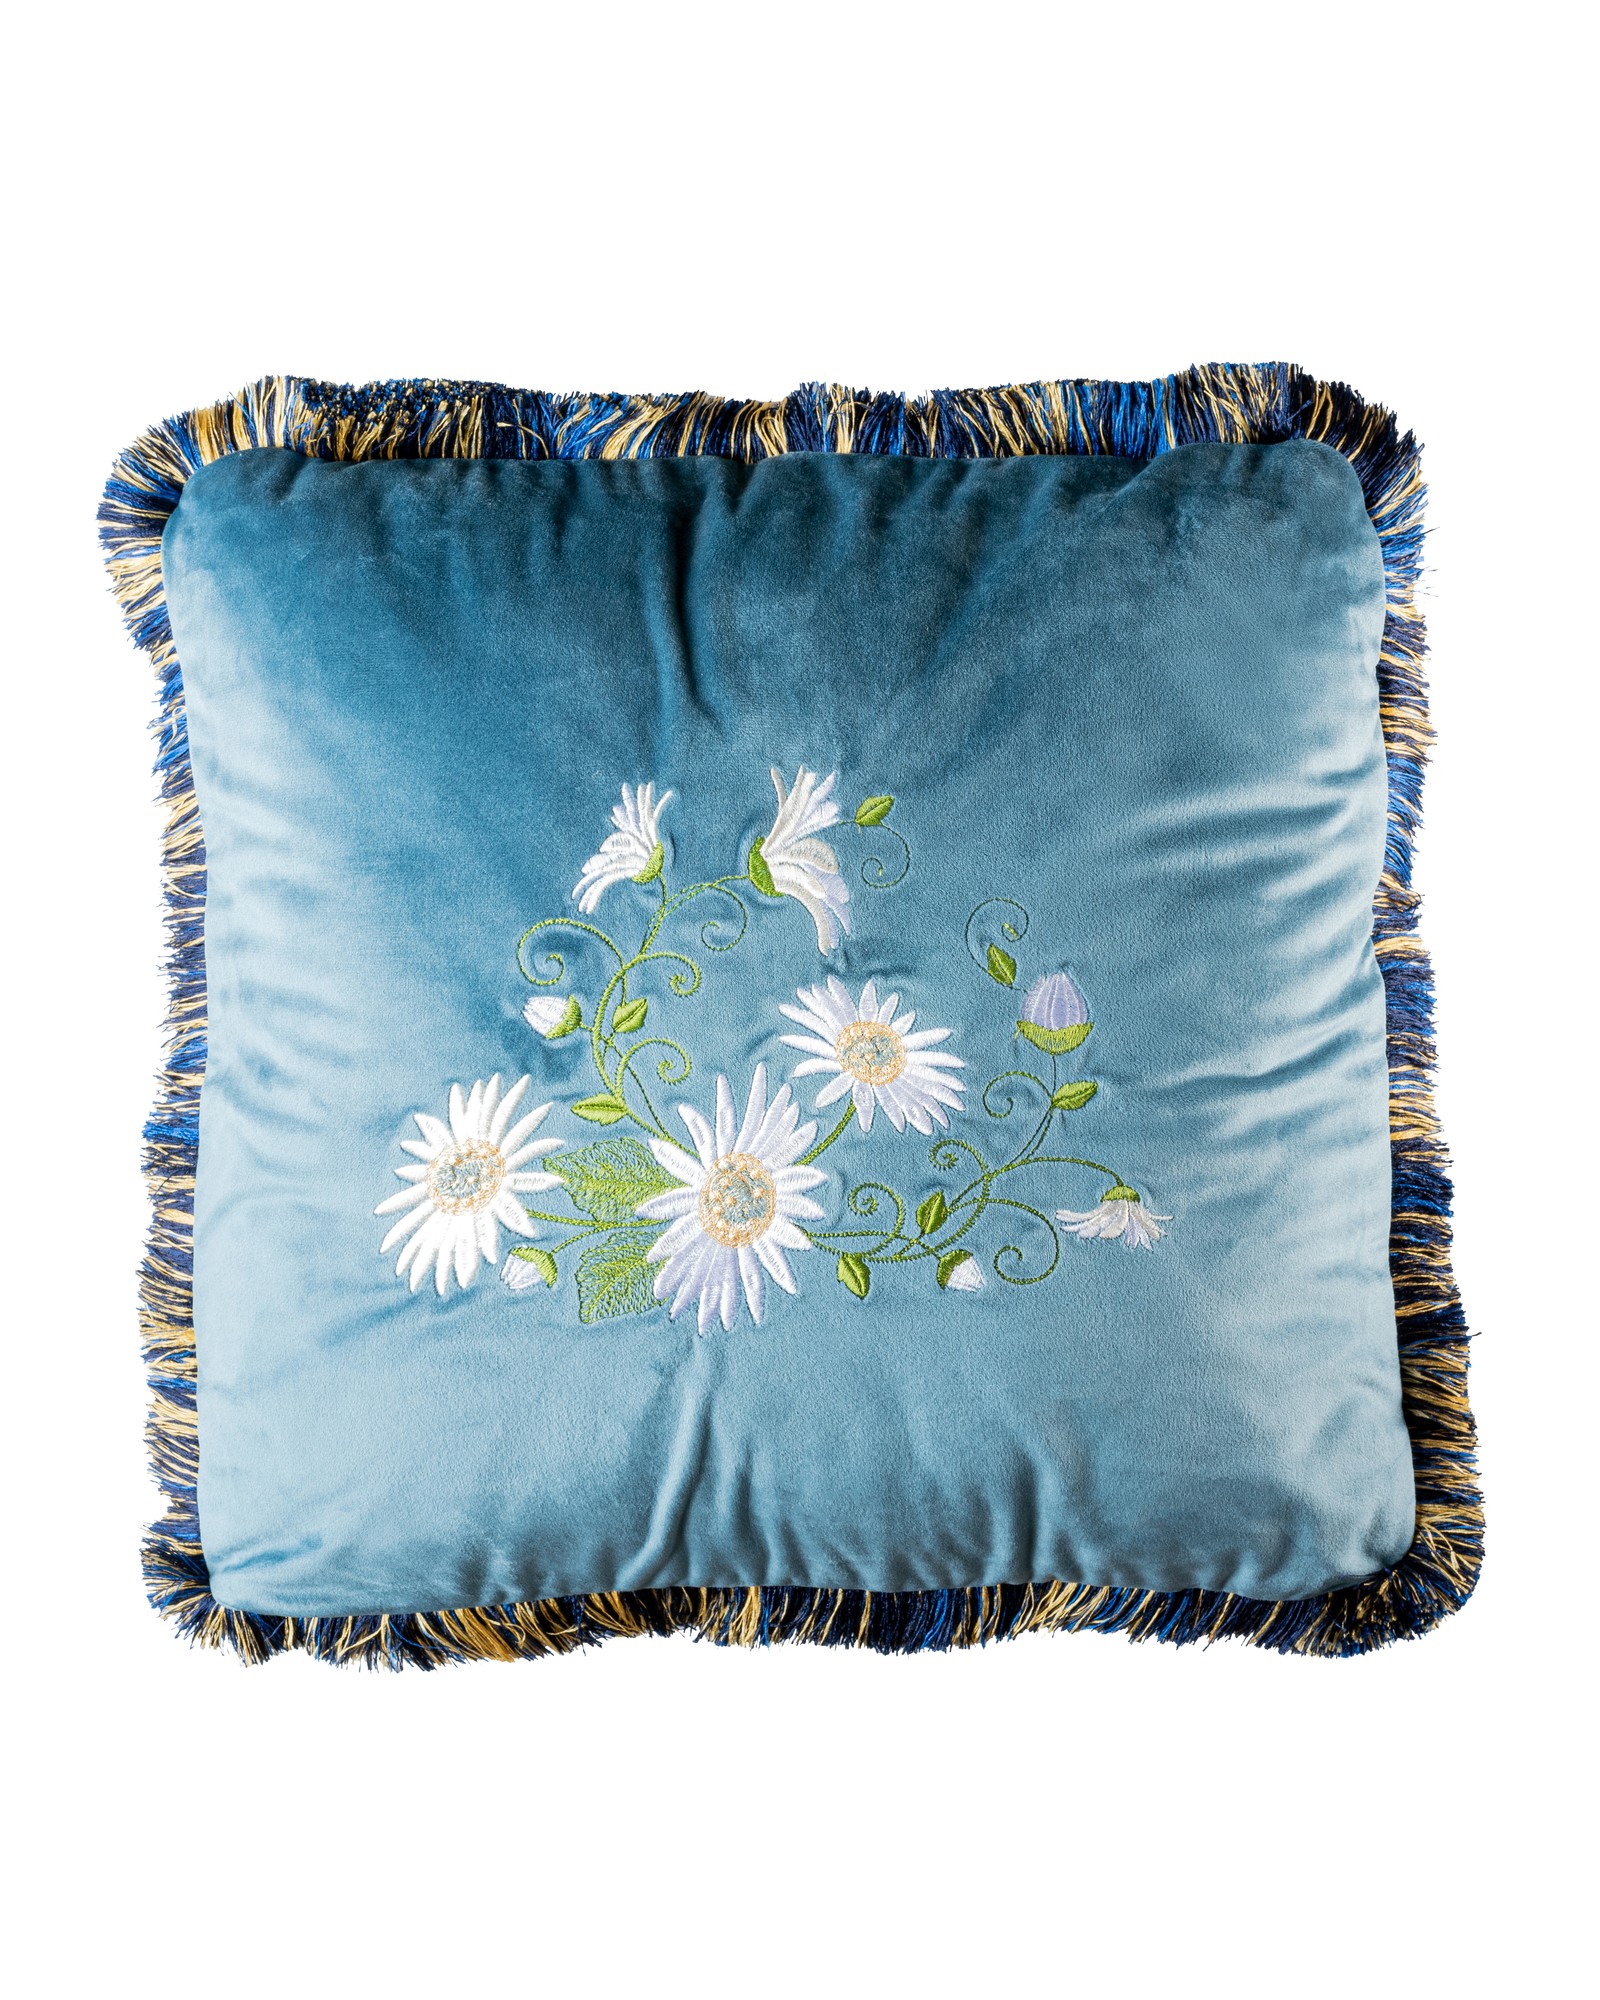 MR Pillow velvet with daisies embroidery